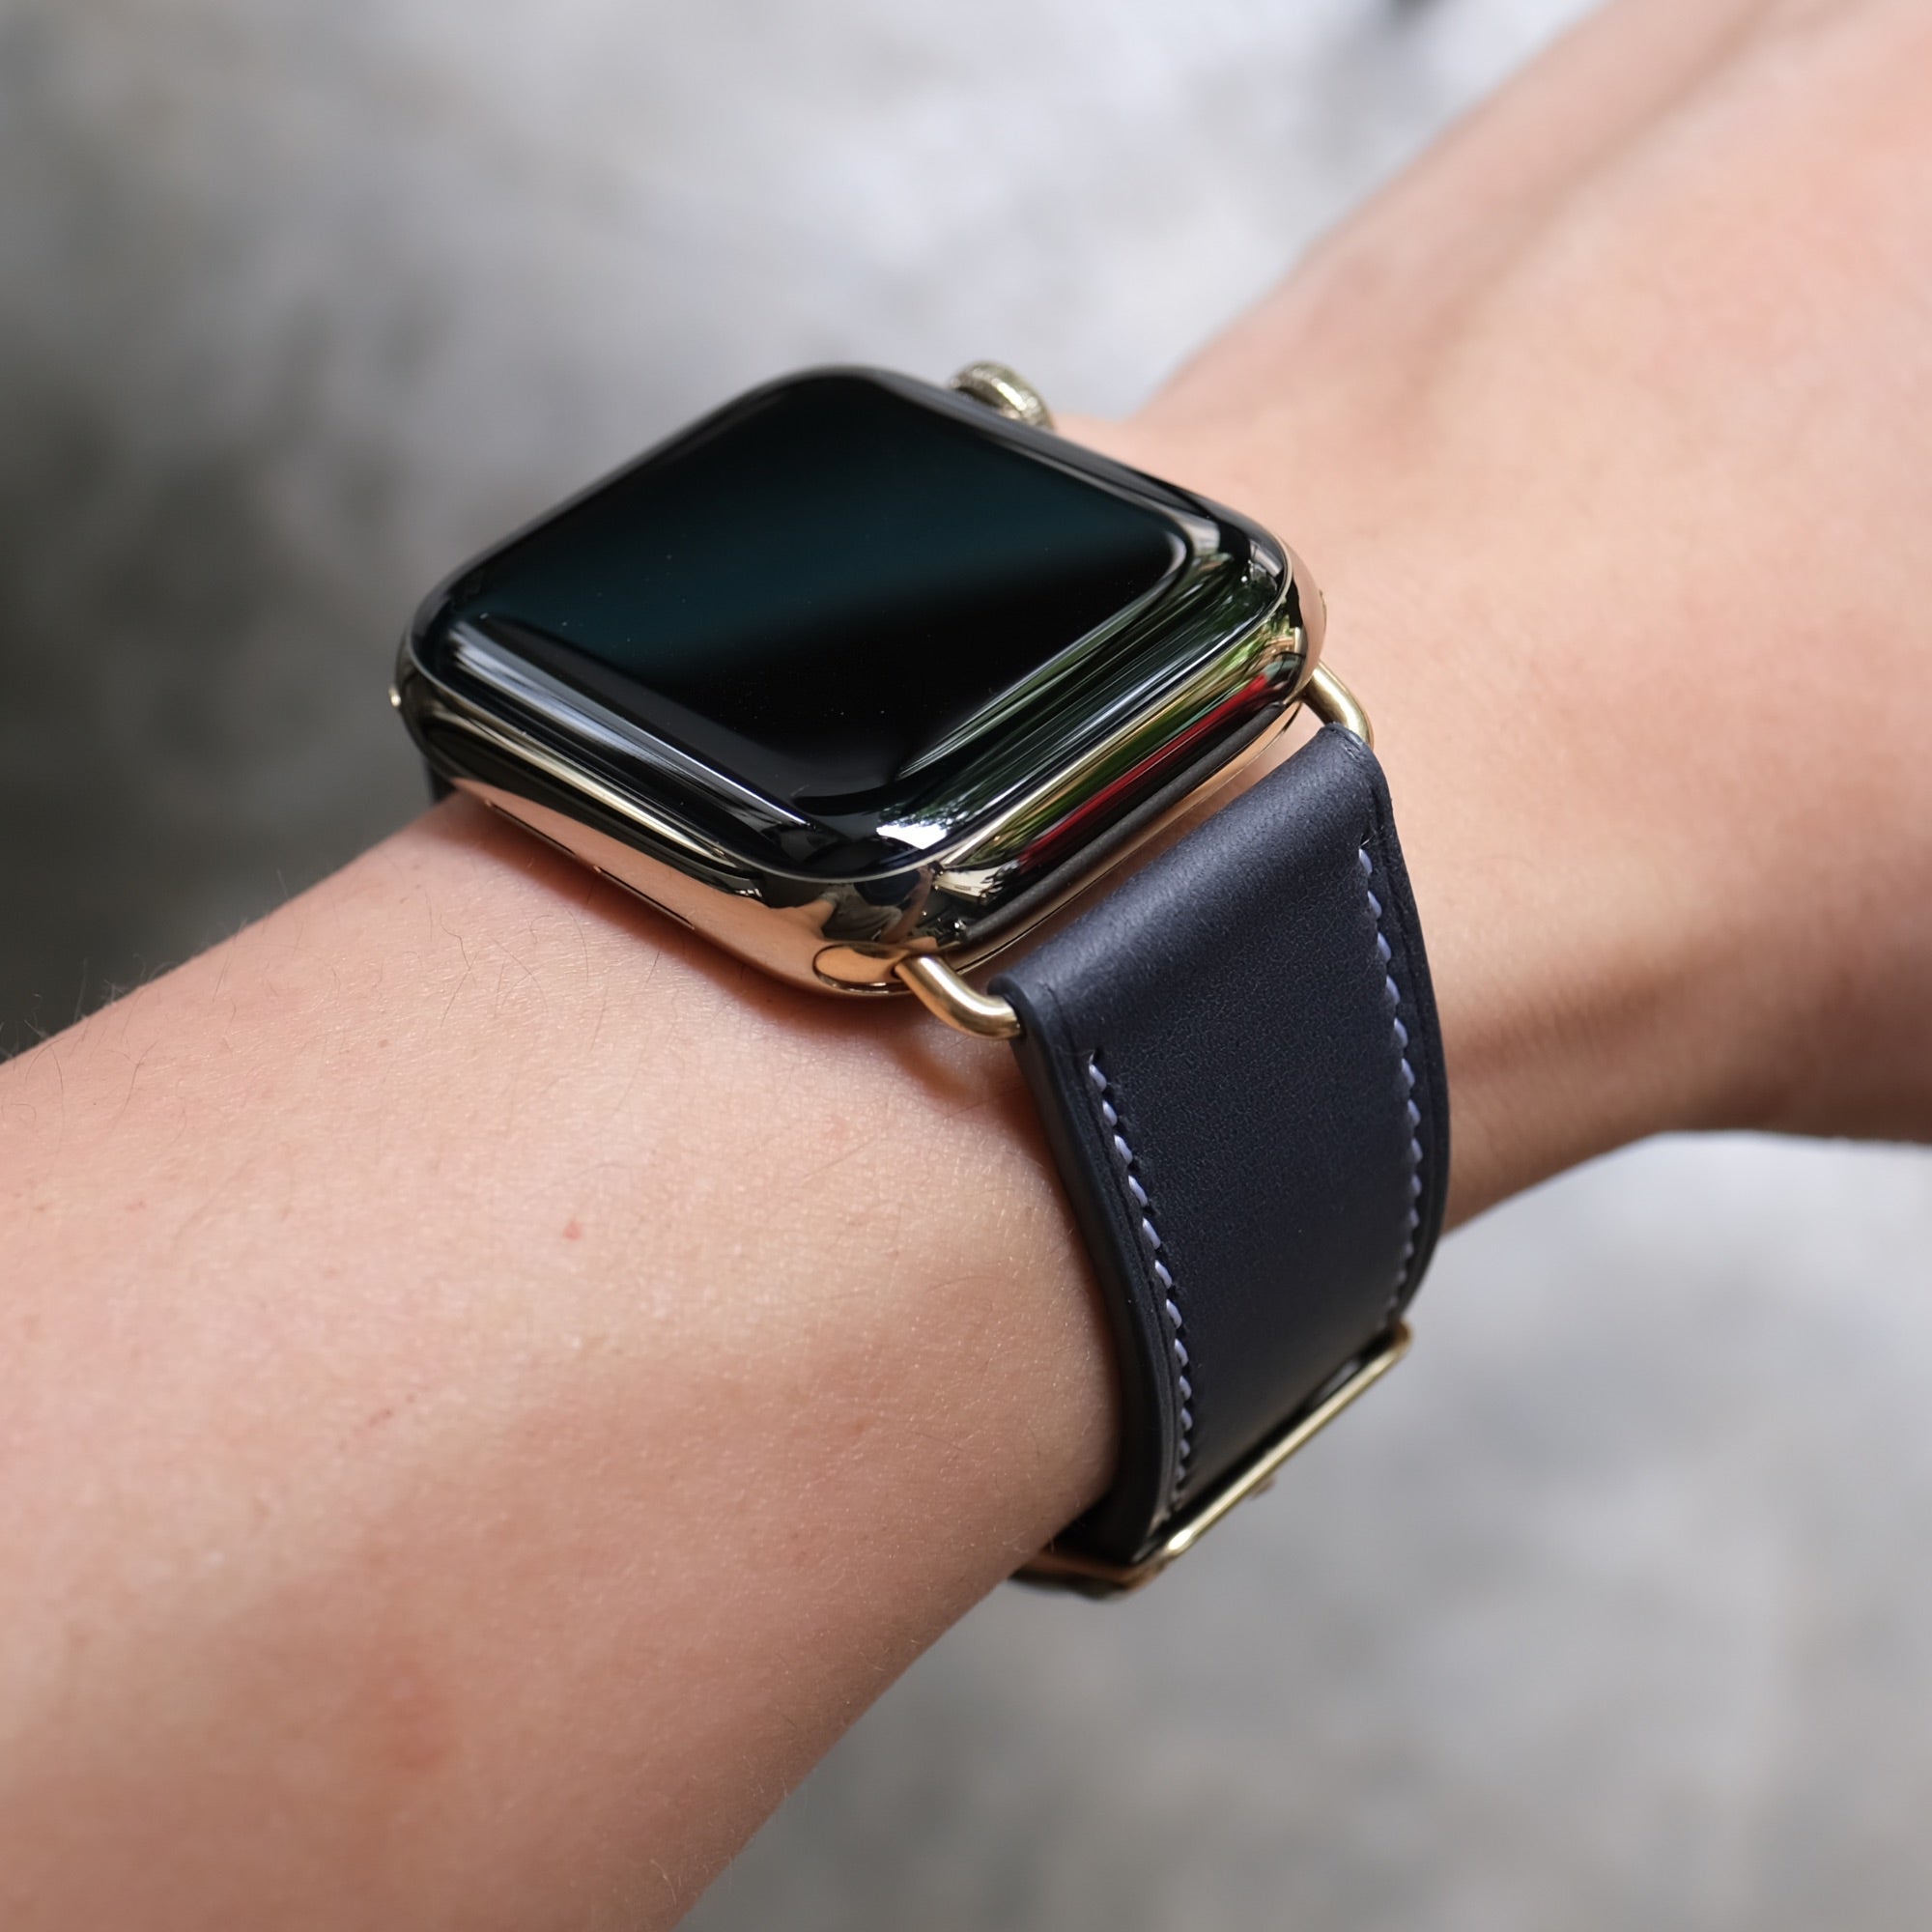 Barenia Leather Apple Watch Bands by Pin & Buckle - Dark Blue - Gold Series 6 and 7 Stainless Steel Hardware - on Wrist